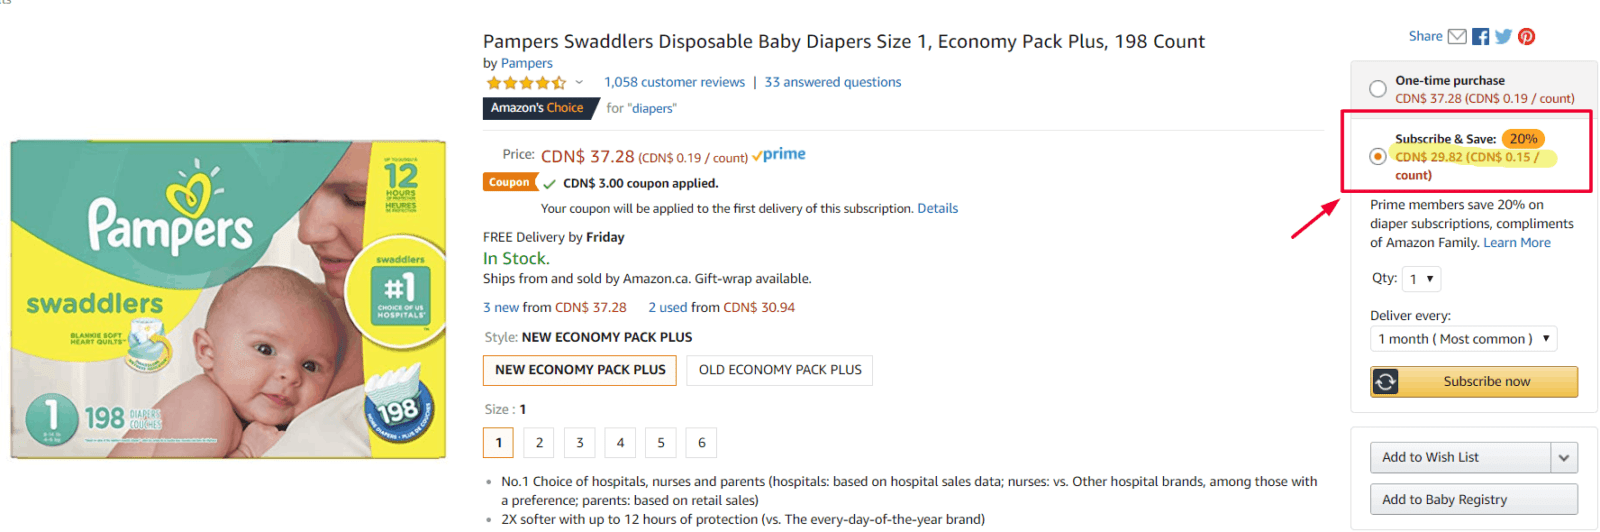 Save Money on Diapers